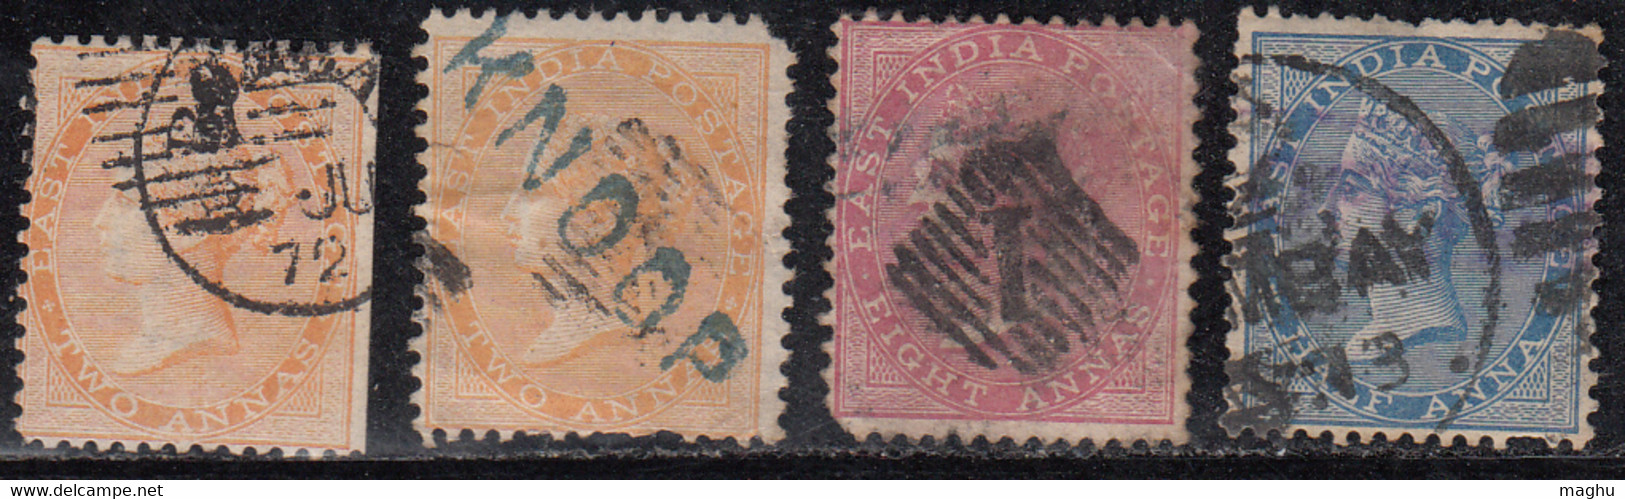 4 Diff., BOMBAY Cancellation, JC Tpye 4 And Local Varities On QV British East India Used, (stamps Damaged) - 1854 Britse Indische Compagnie